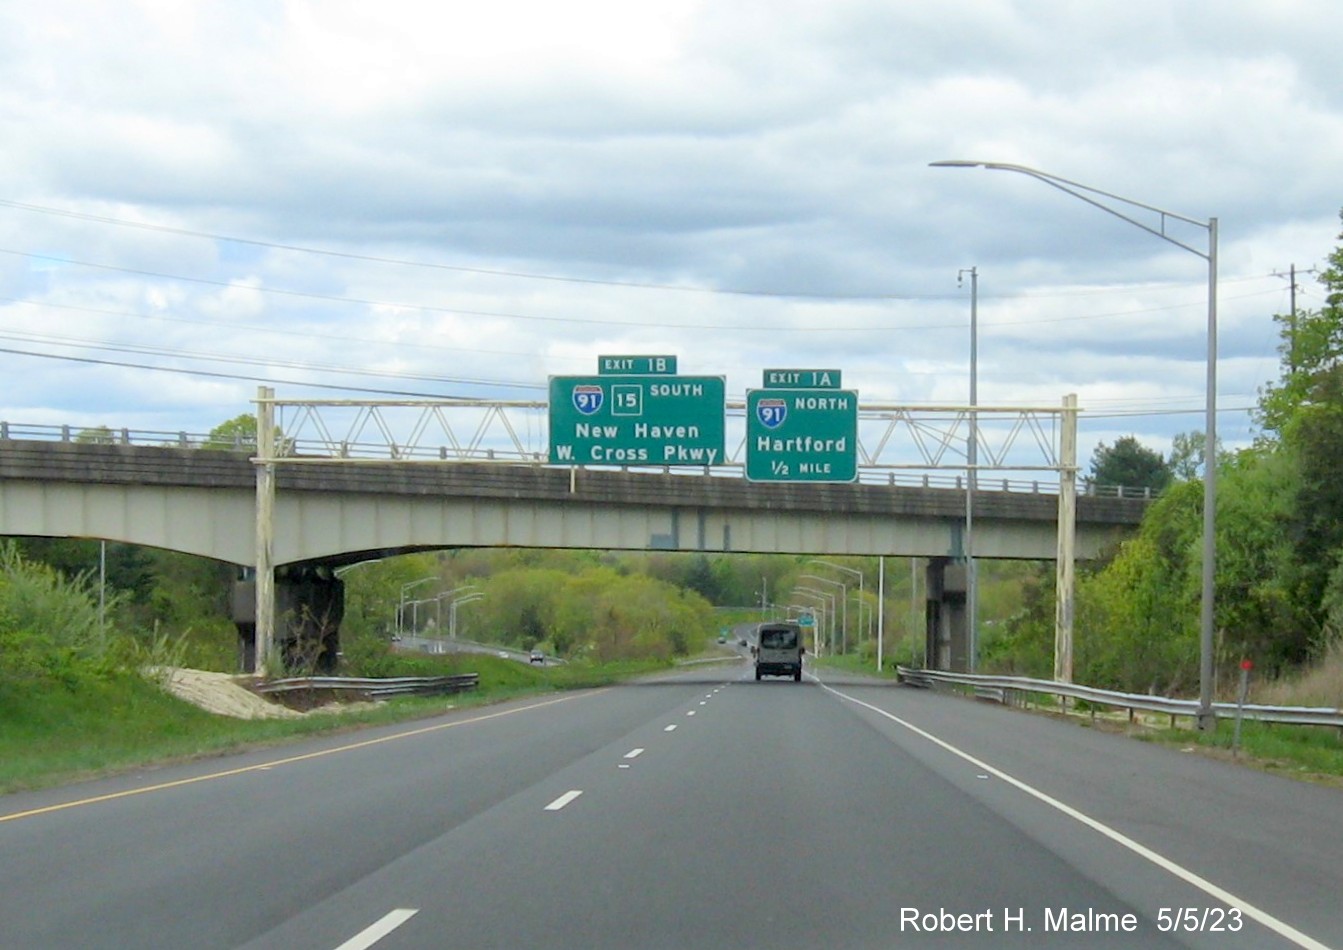 Image of overhead advance signs for I-91 exits with new milepost based exit numbers at beginning of I-691 in Meriden CT, May 2023